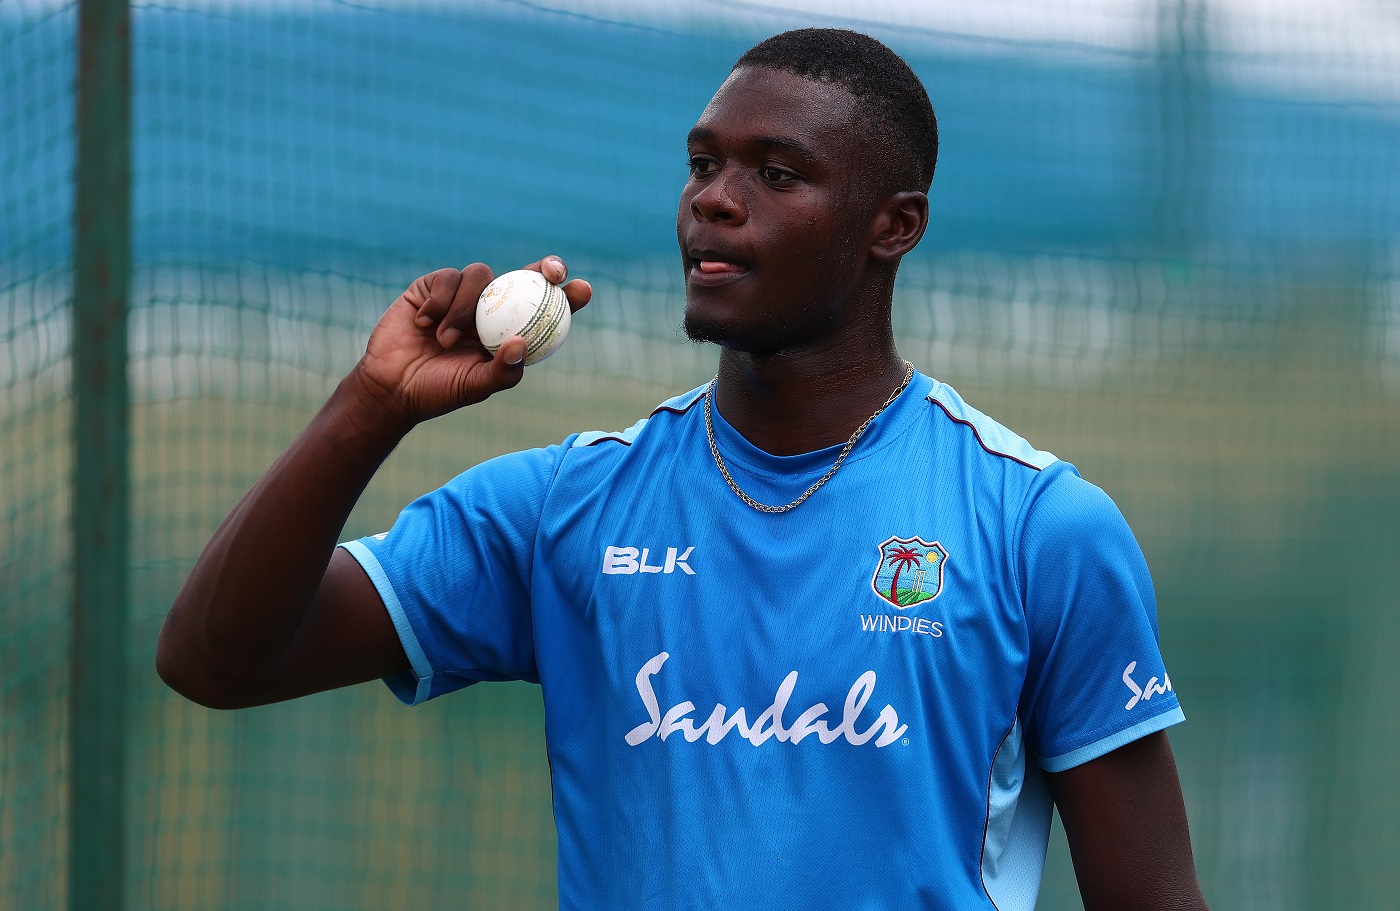 Kemar Roach and Jayden Seales won over Pakistan  in the first Test in Jamaica